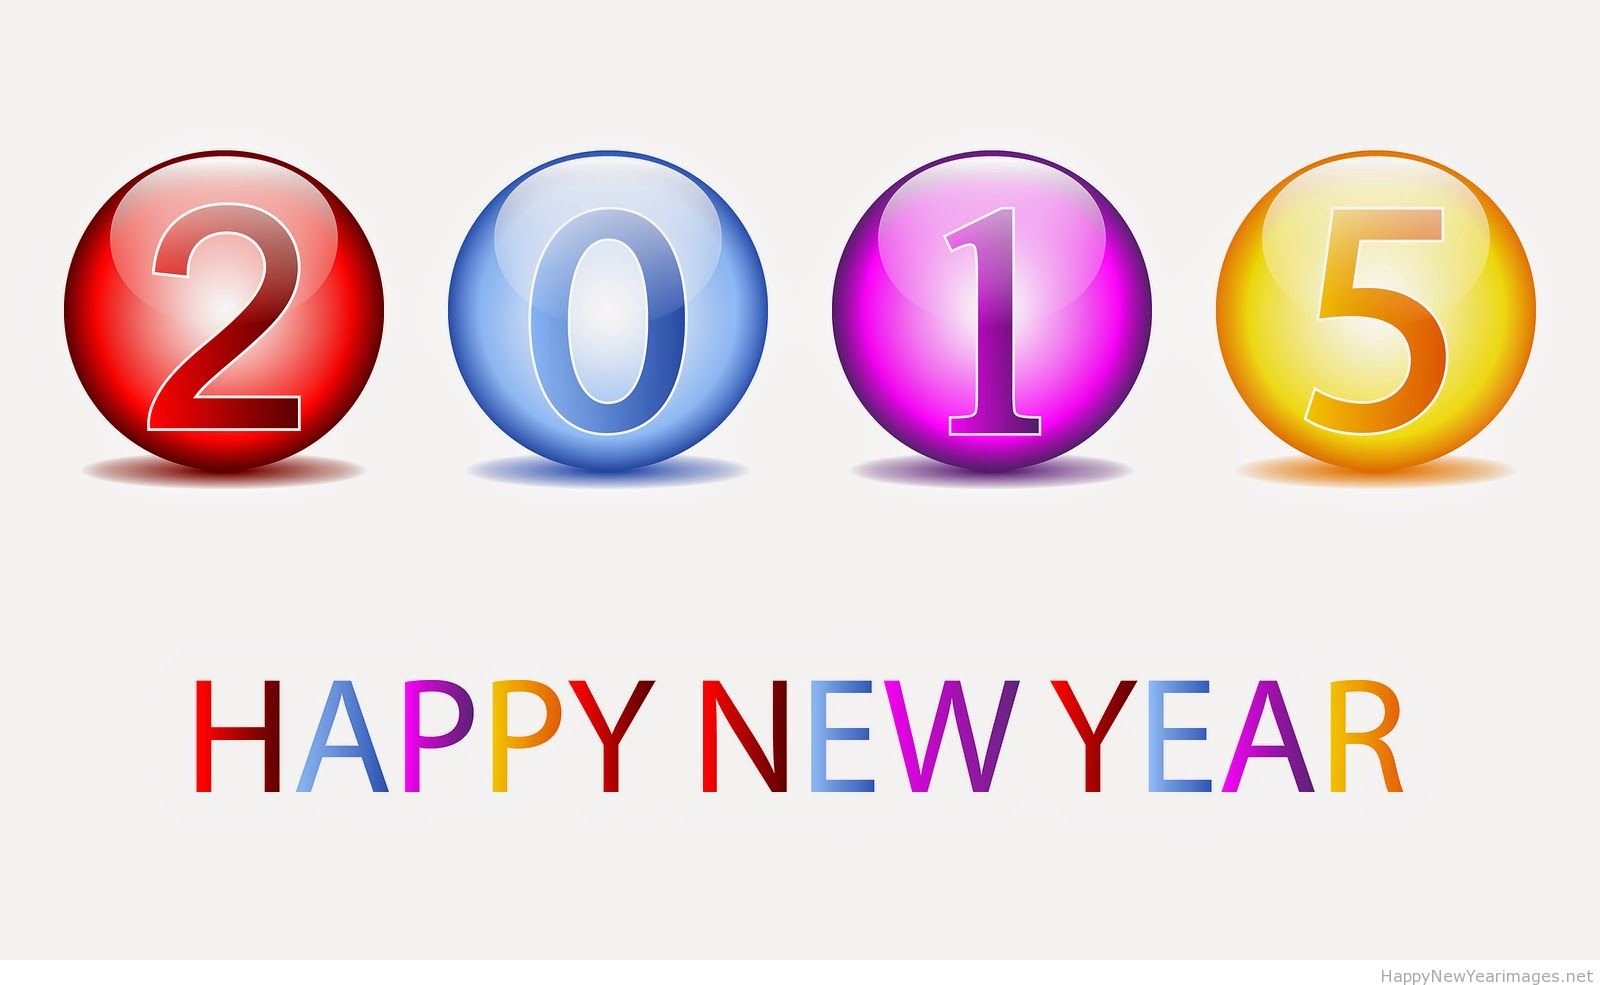 Happy new year banners clipart